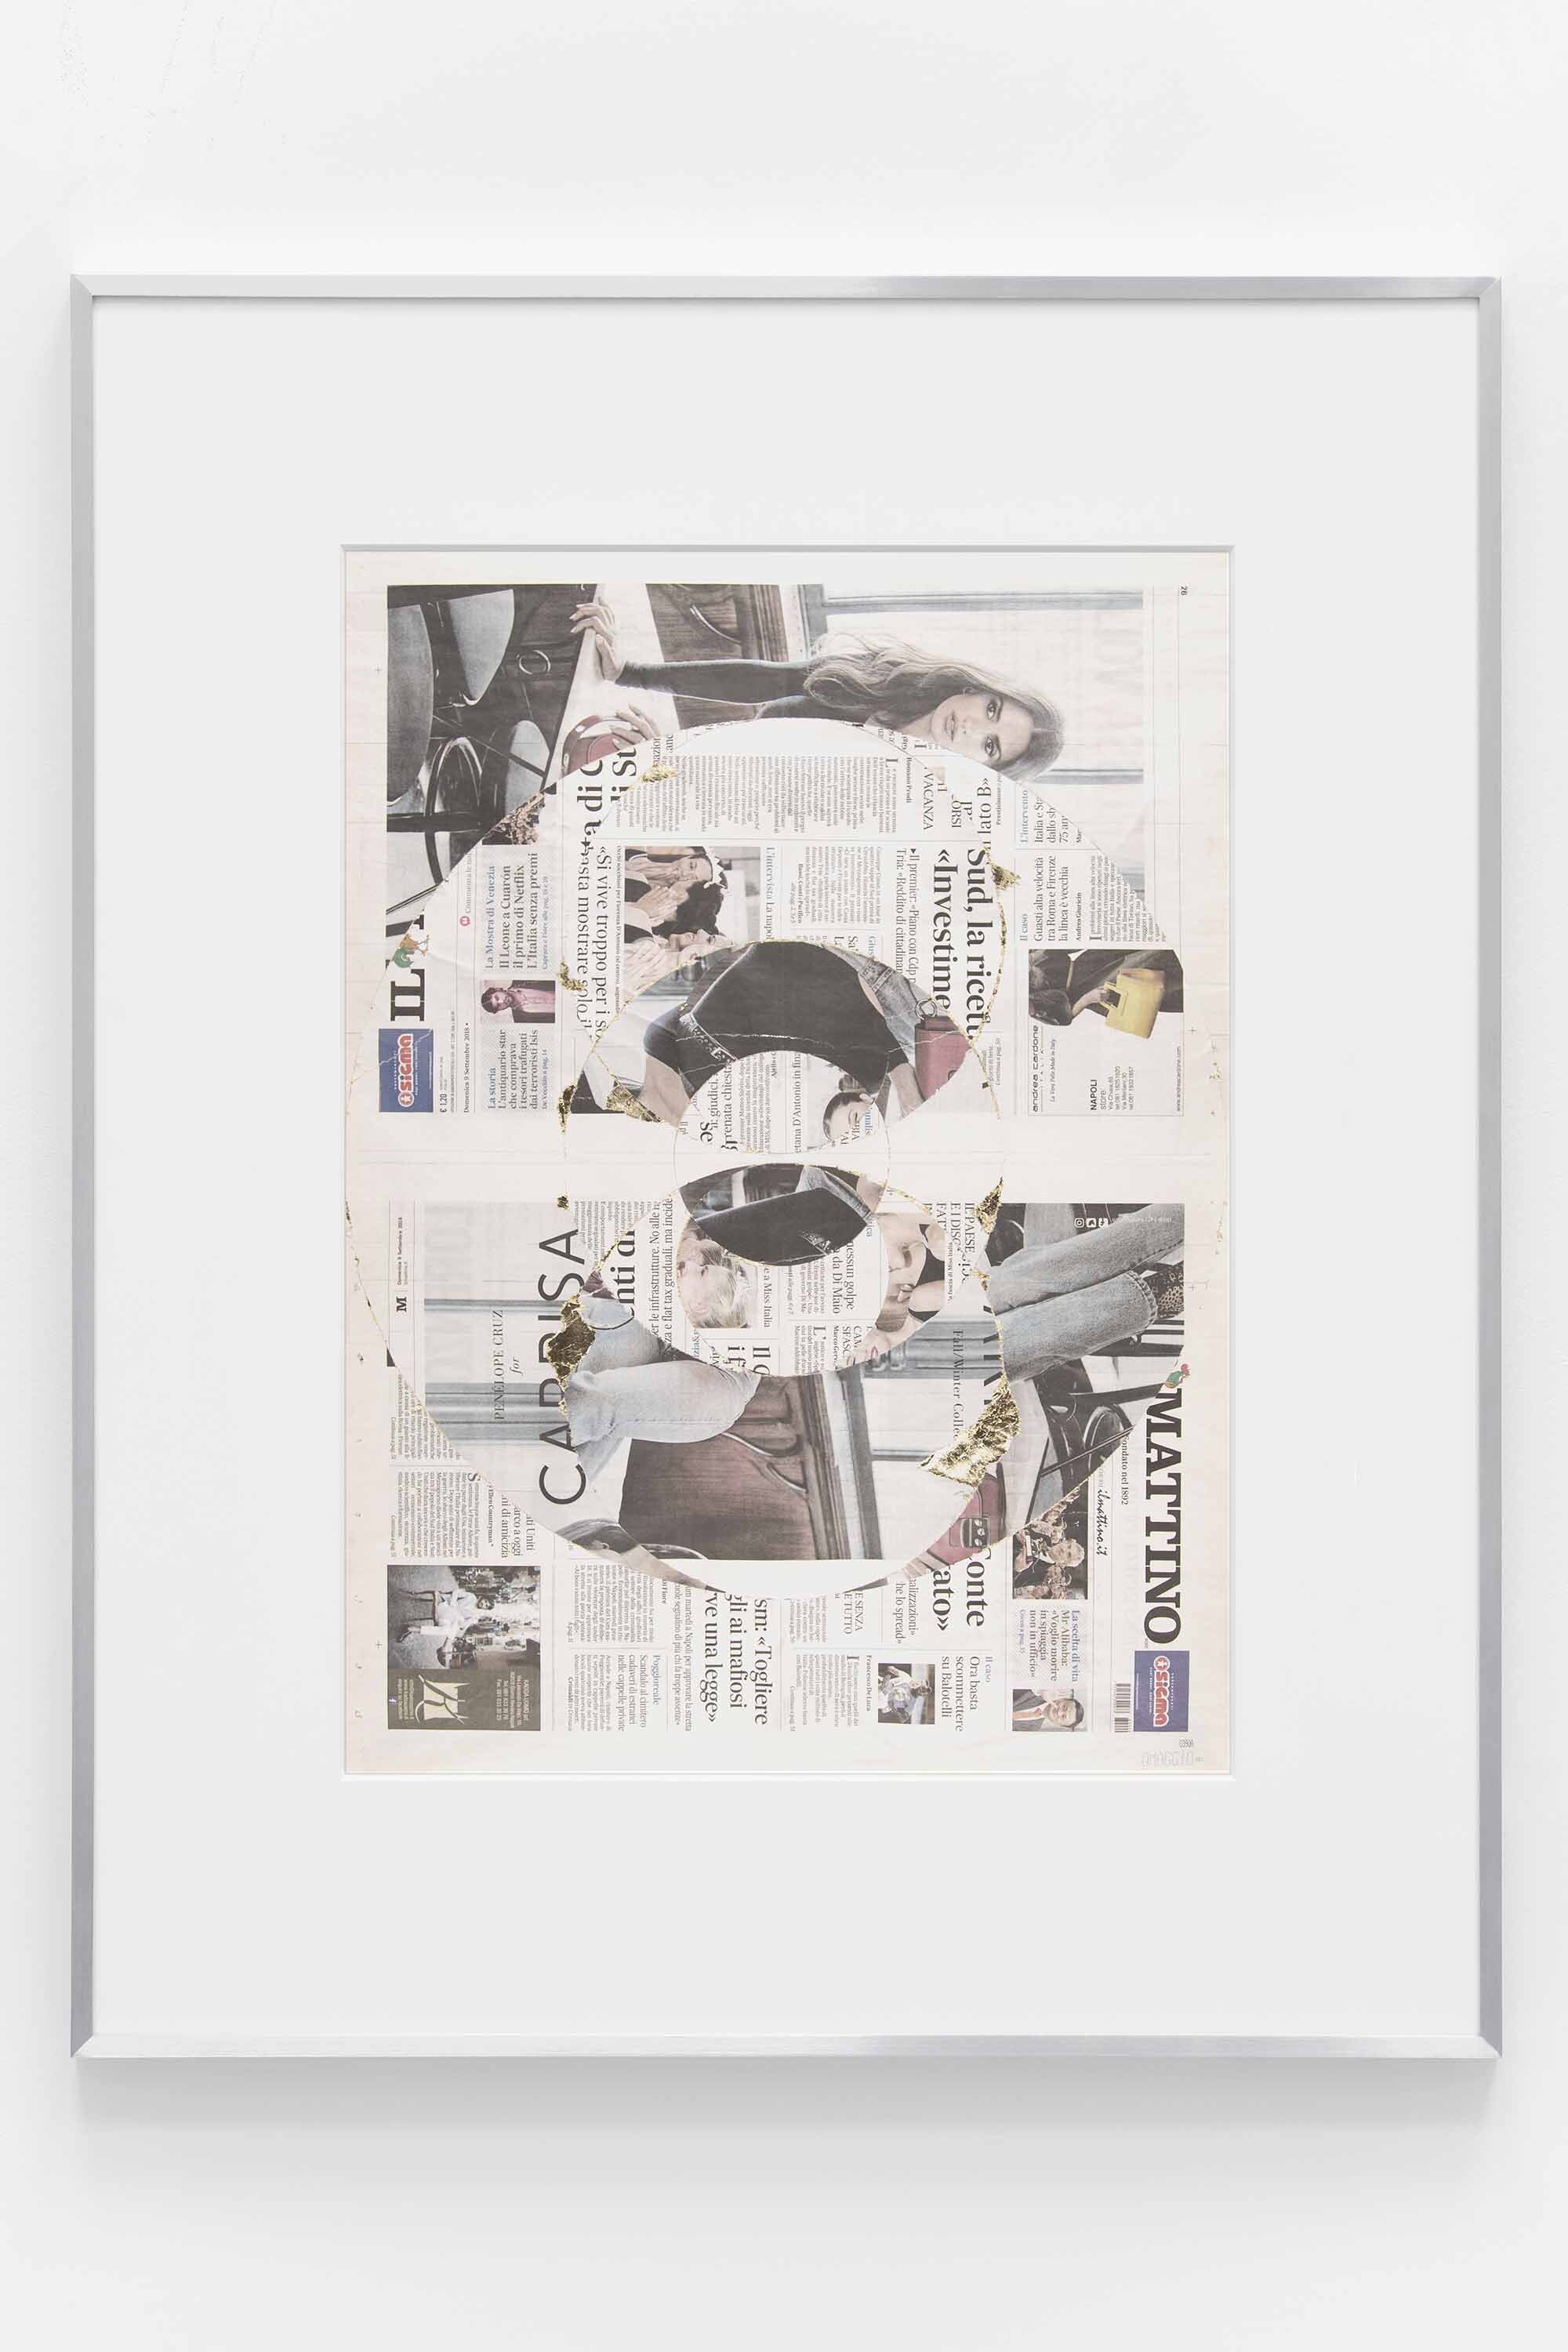   Blind Collage (Seven 180º Rotations, Il Mattino: Naples, Italy, Sunday, September 9, 2018)   2021  Newspaper, tape, and 22 karat gold leaf  39 1/8 x 31 1/4 inches   Blind Collages, 2017–   Exhibition:   Foreign Correspondence, 2021  